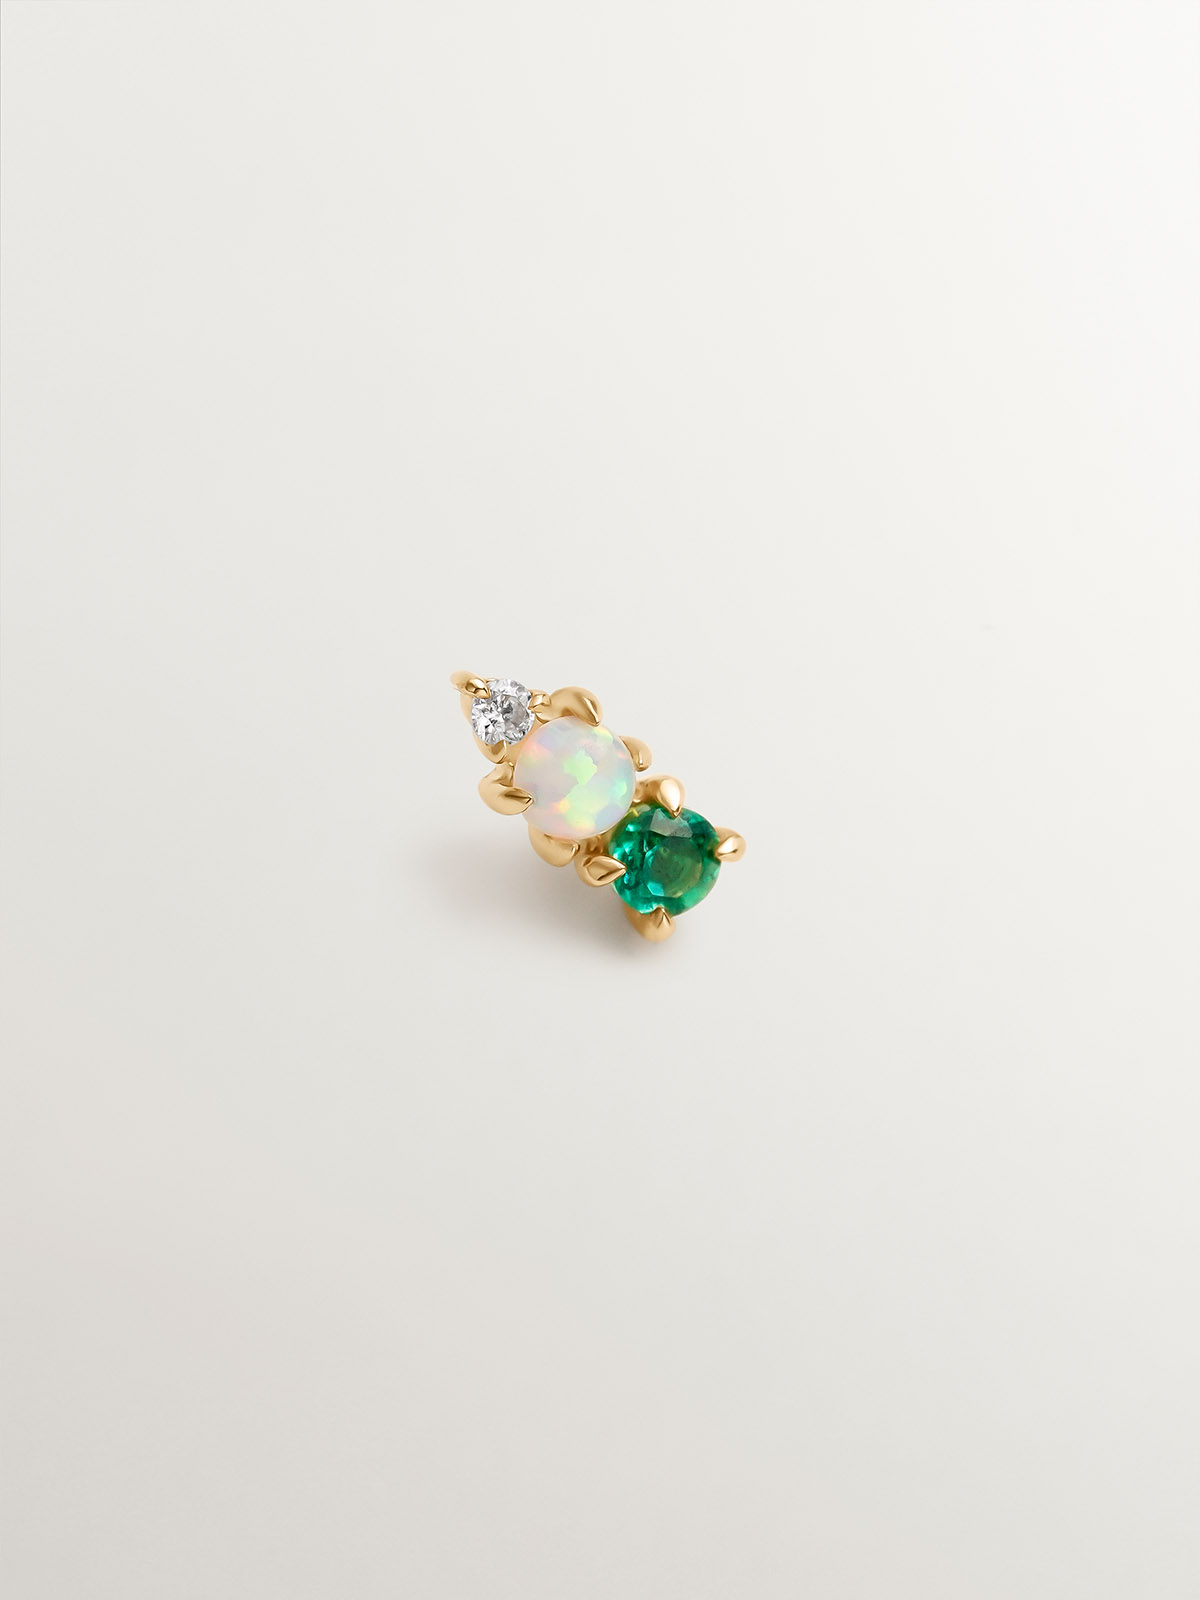 Single 18K yellow gold earring with emerald, lab grown white opal and diamond.